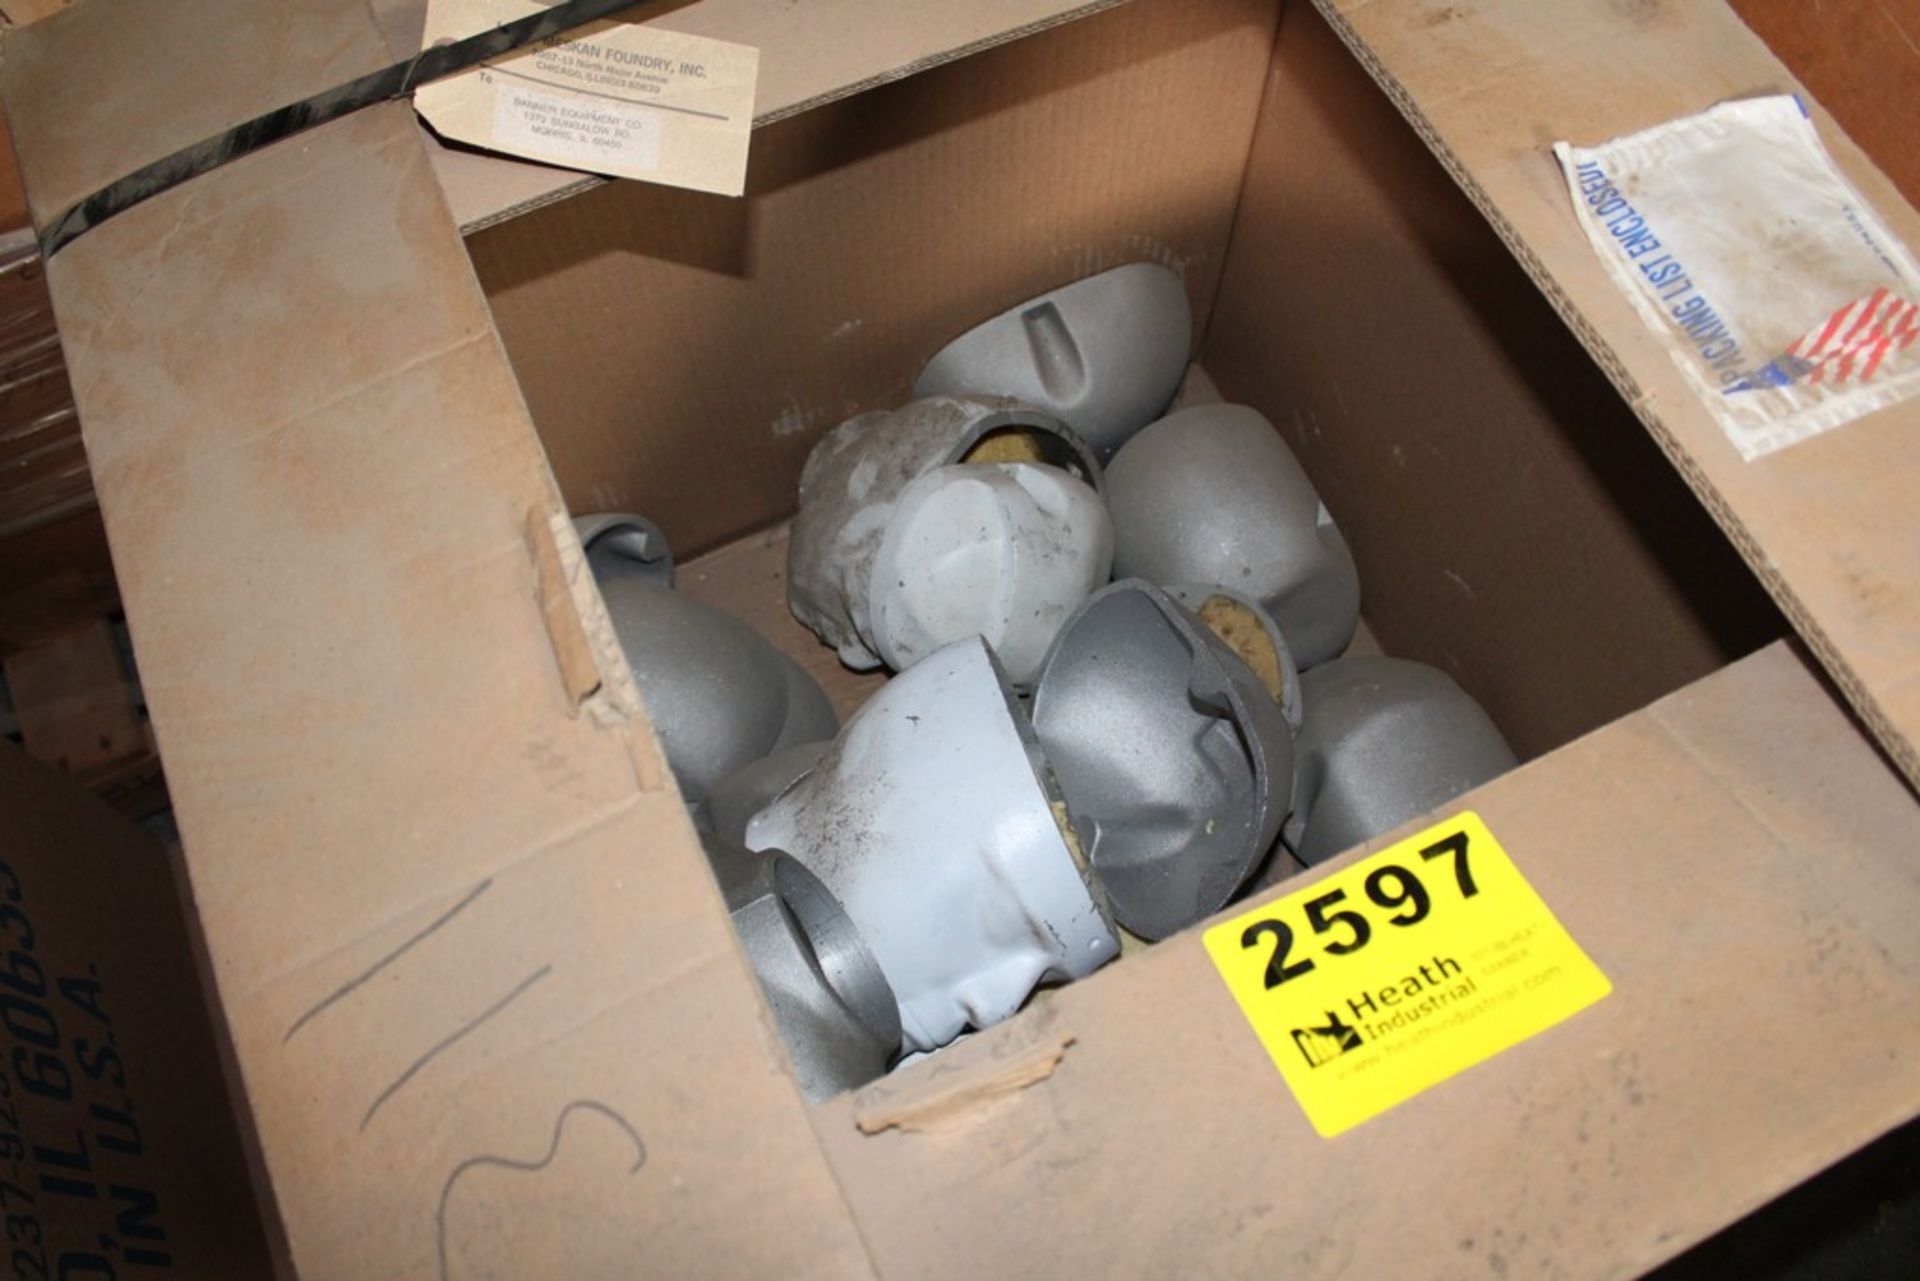 ASSORTED HEAD CASTINGS IN BOX